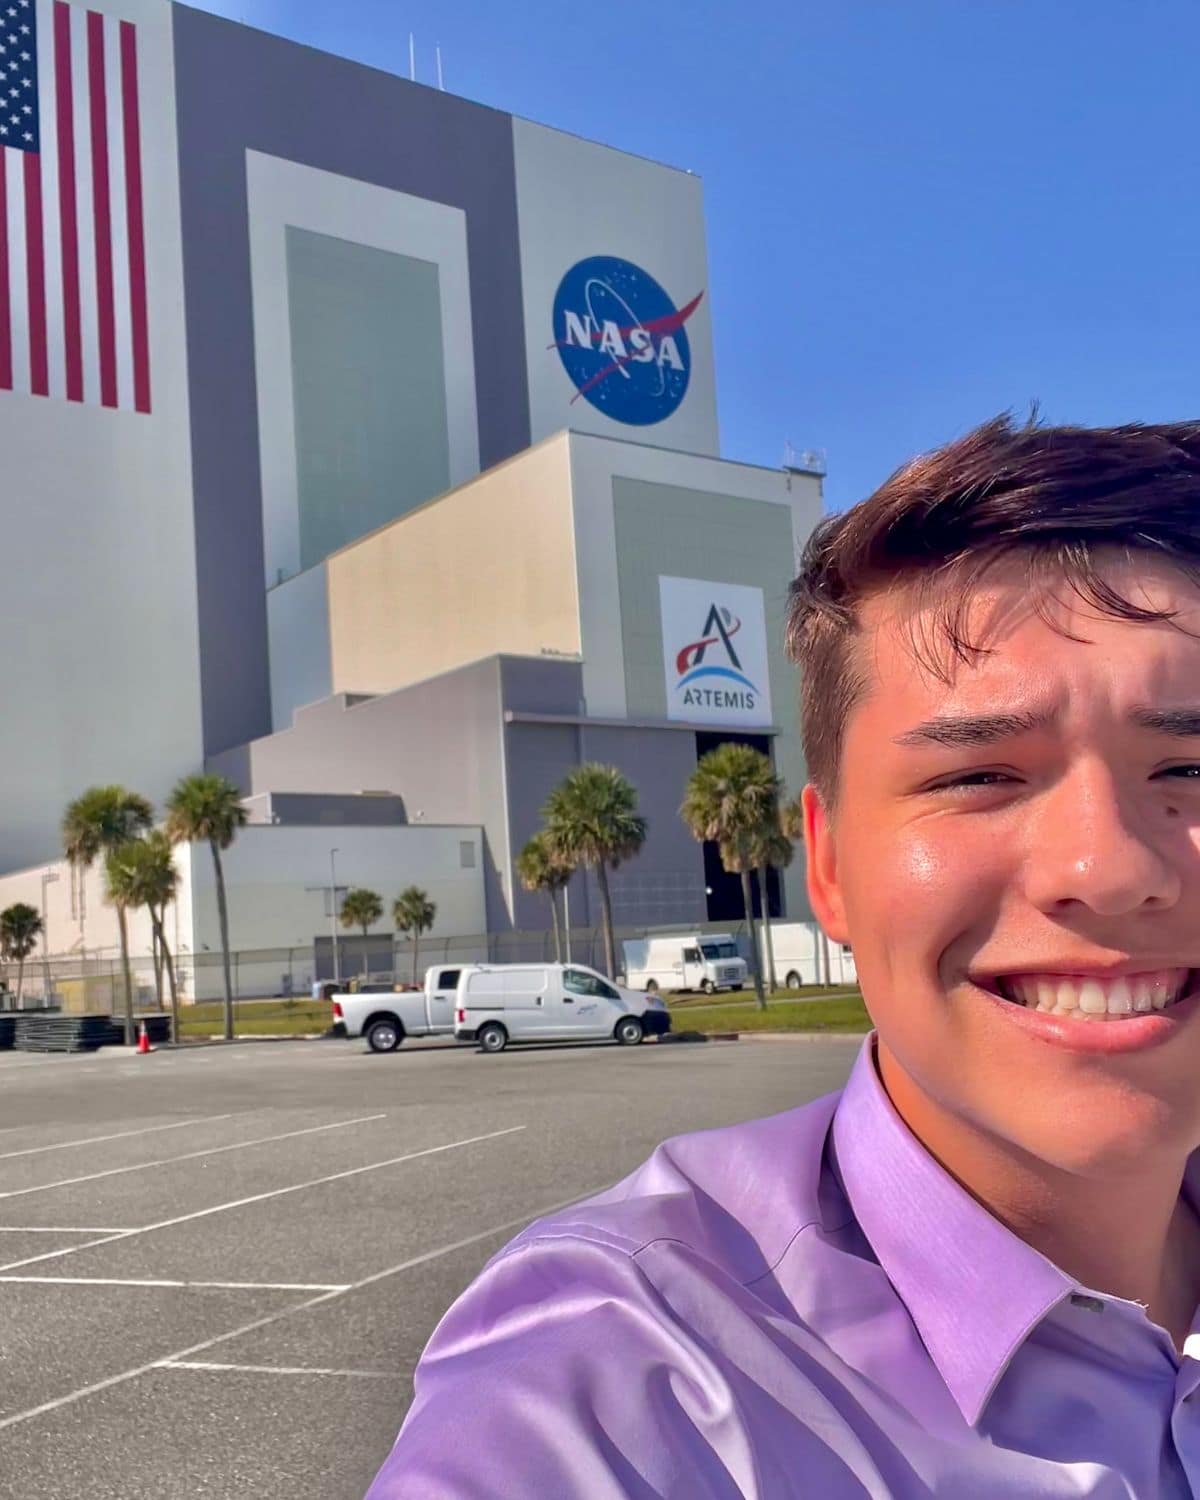 Aerospace Engineering student Connor Arnold with NASA’s Vehicle Assembly Building in the background. (Photo: Connor Arnold)